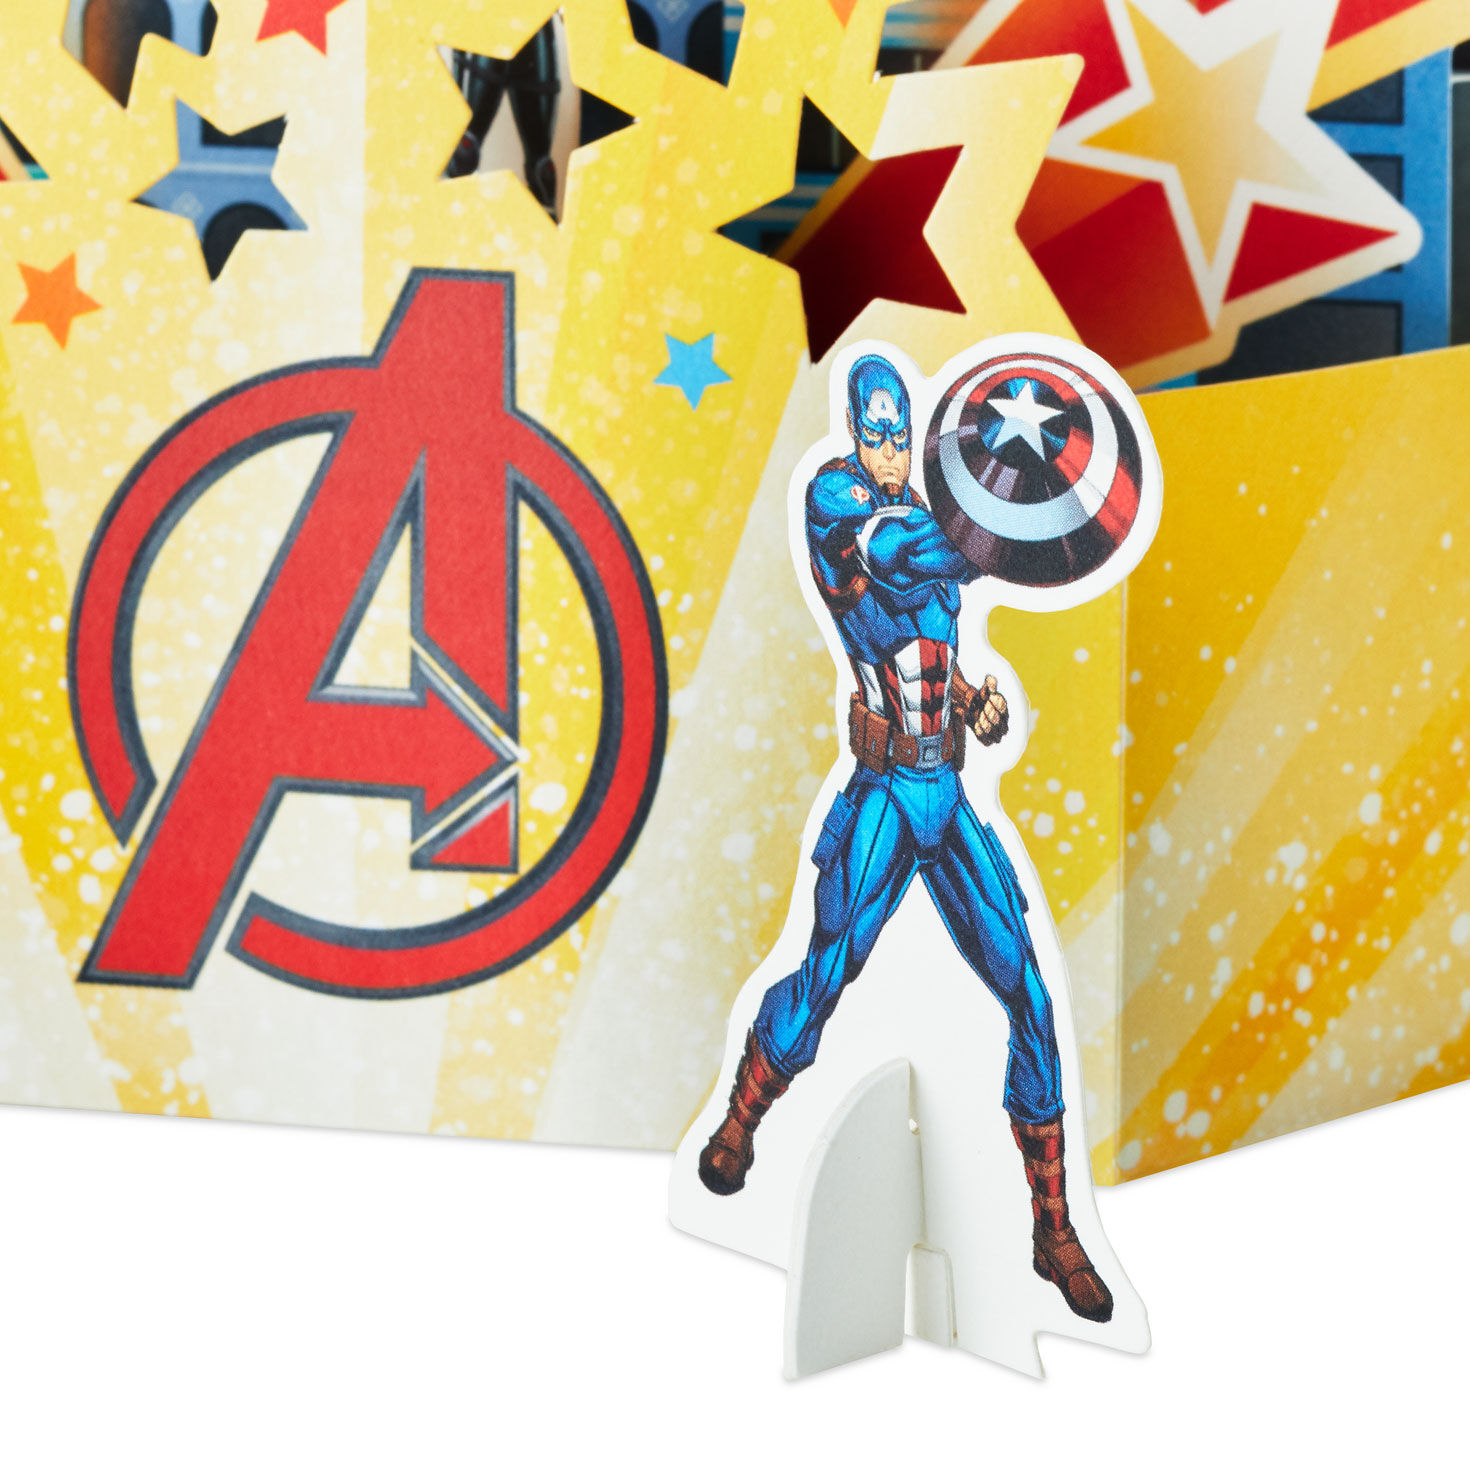 Marvel Avengers Assemble and Celebrate 3D Pop-Up Card With Playset for only USD 8.99 | Hallmark